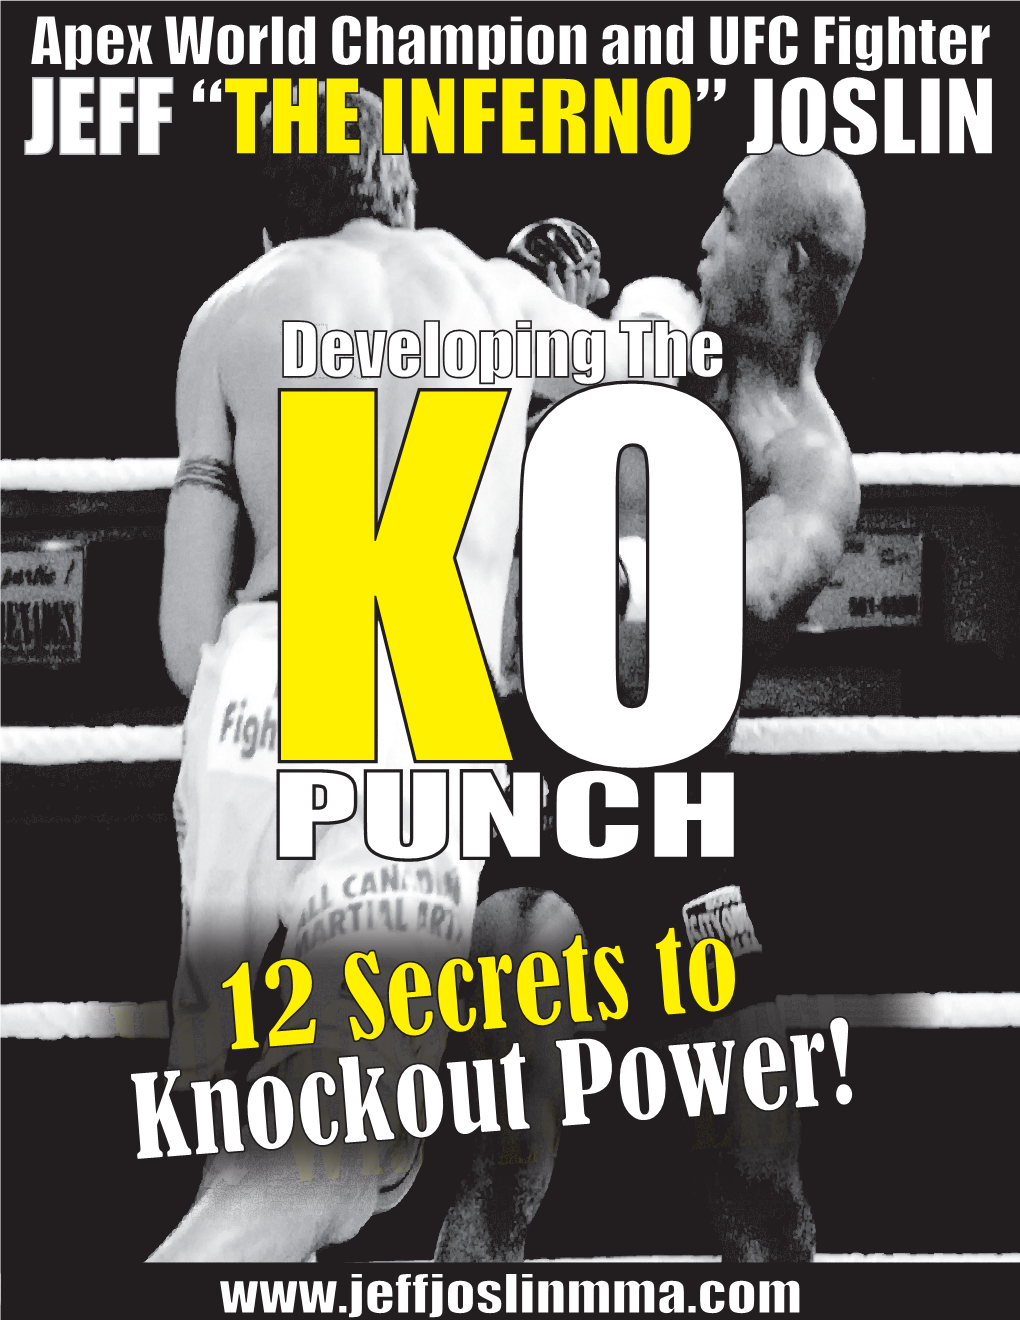 12 Secrets to Drastically Improve Your Punching Power!